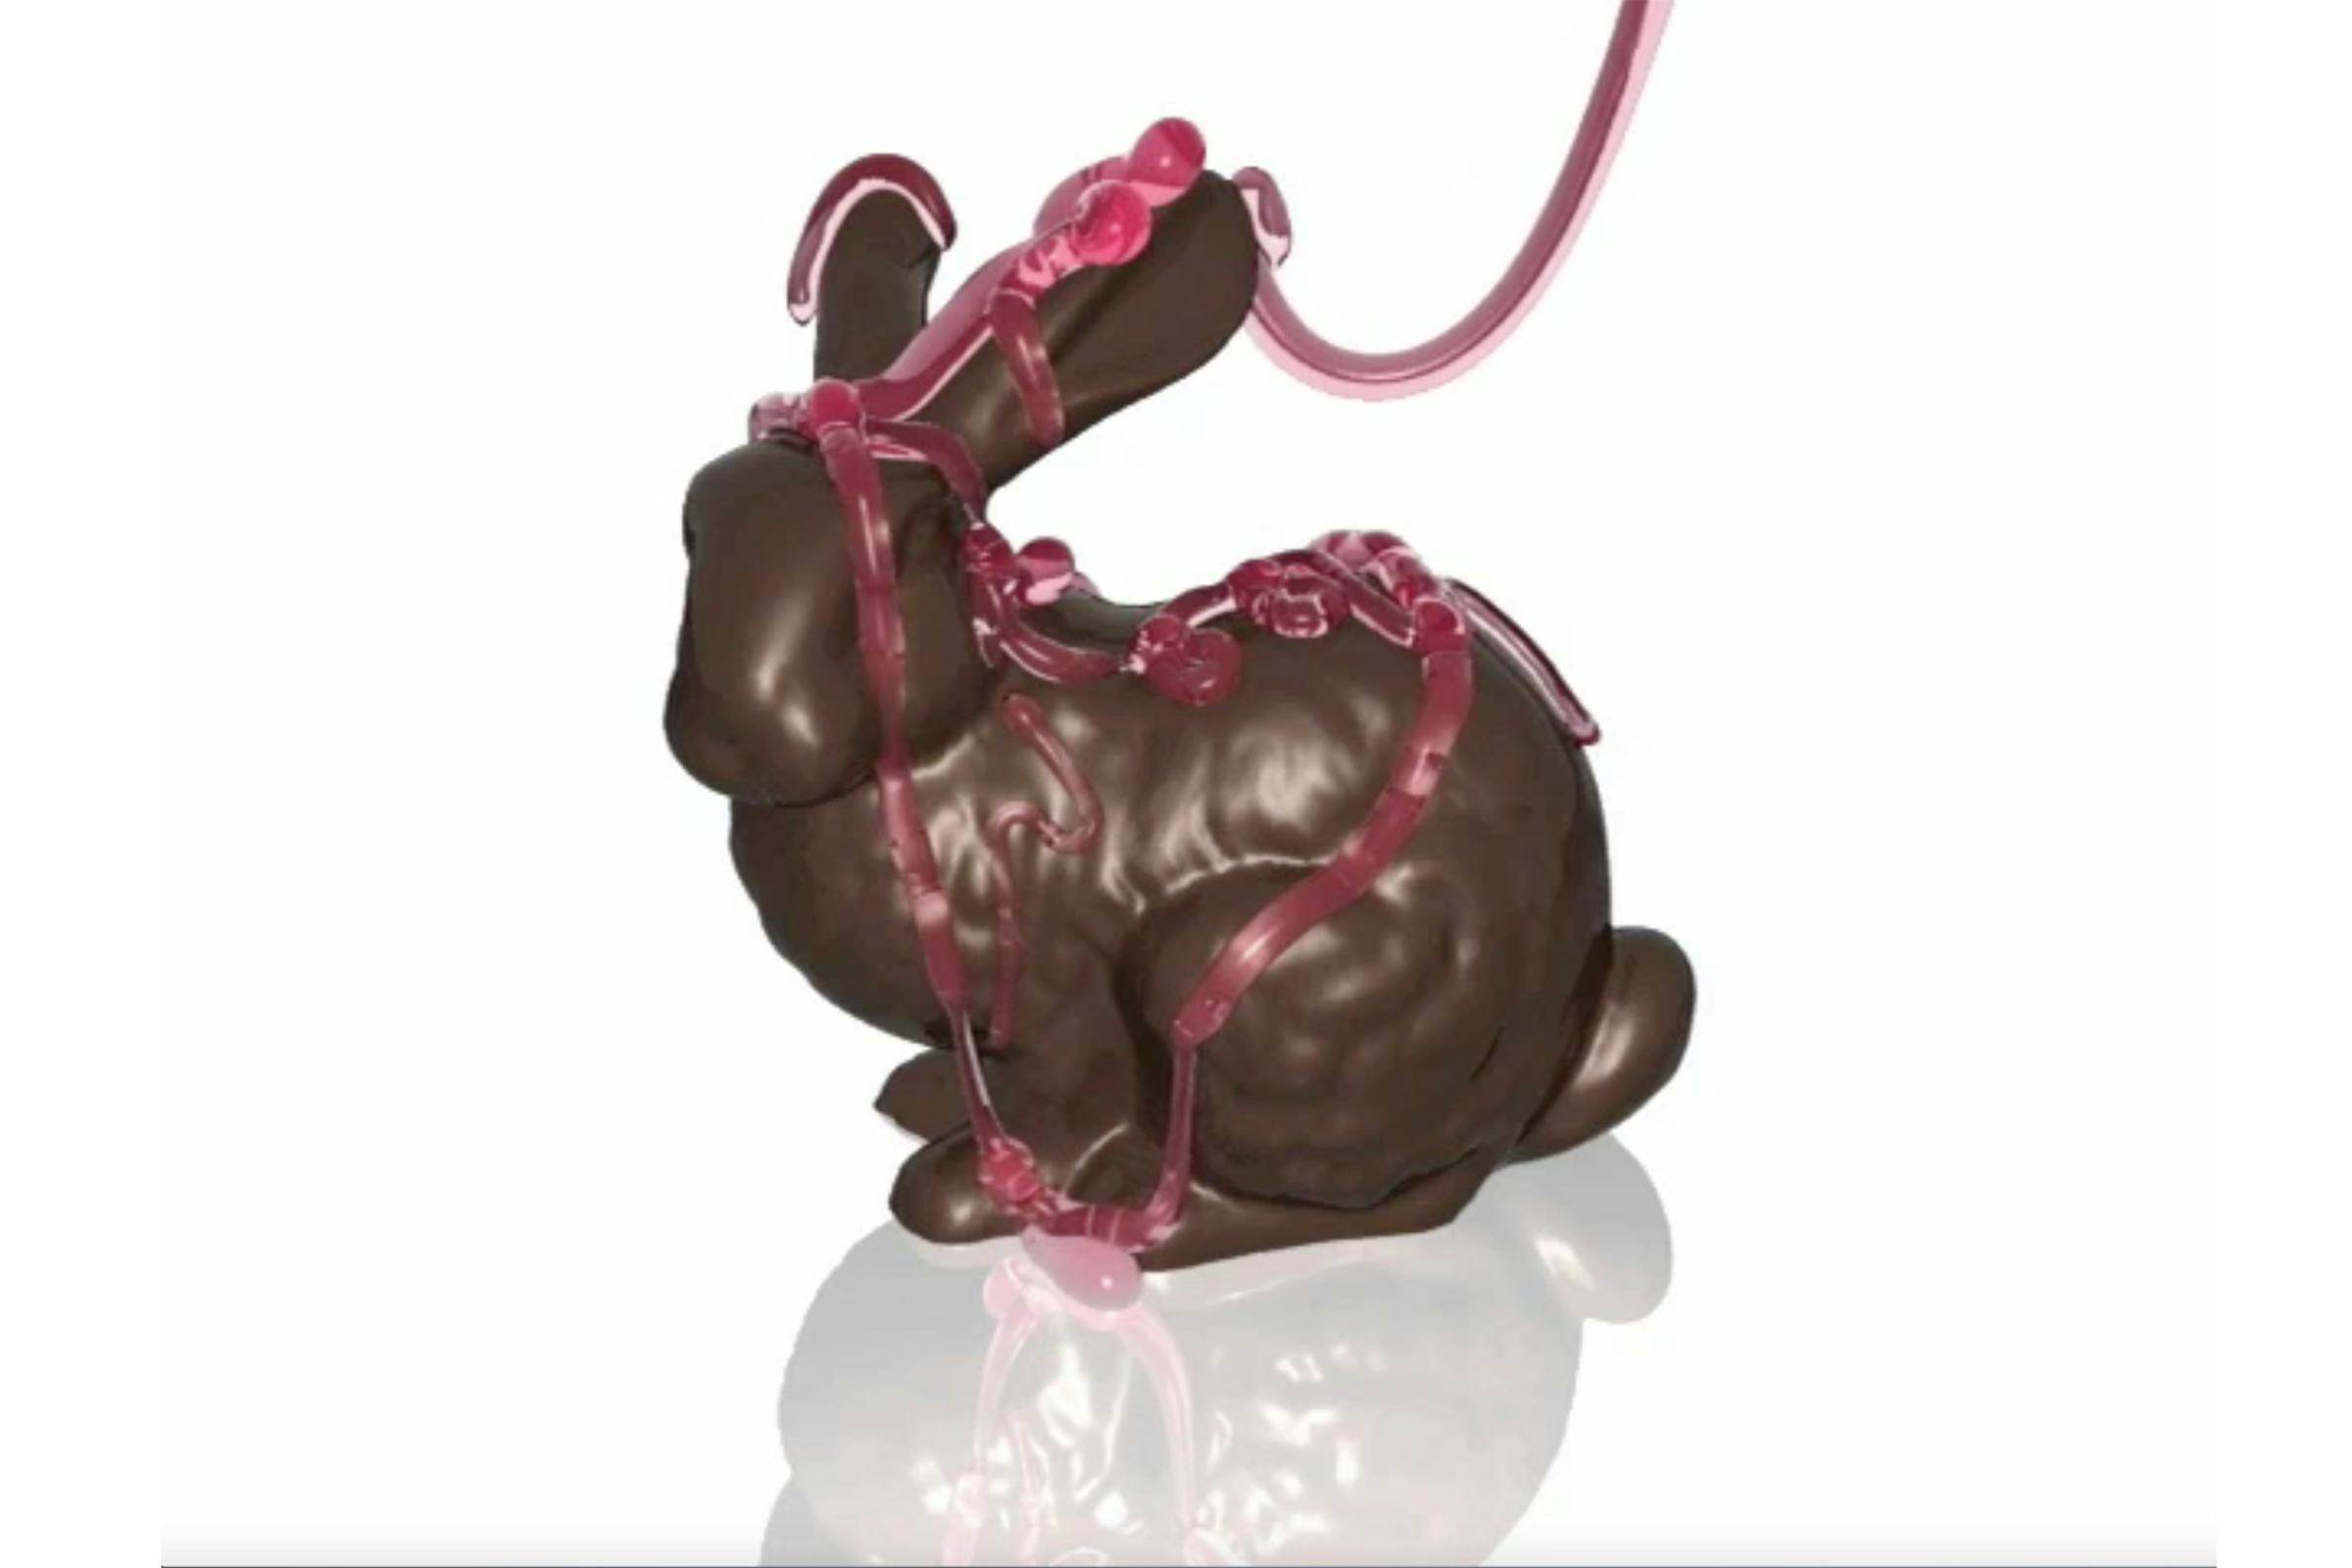 A stream of raspbrerry sauce being poured over a chocolate bunny